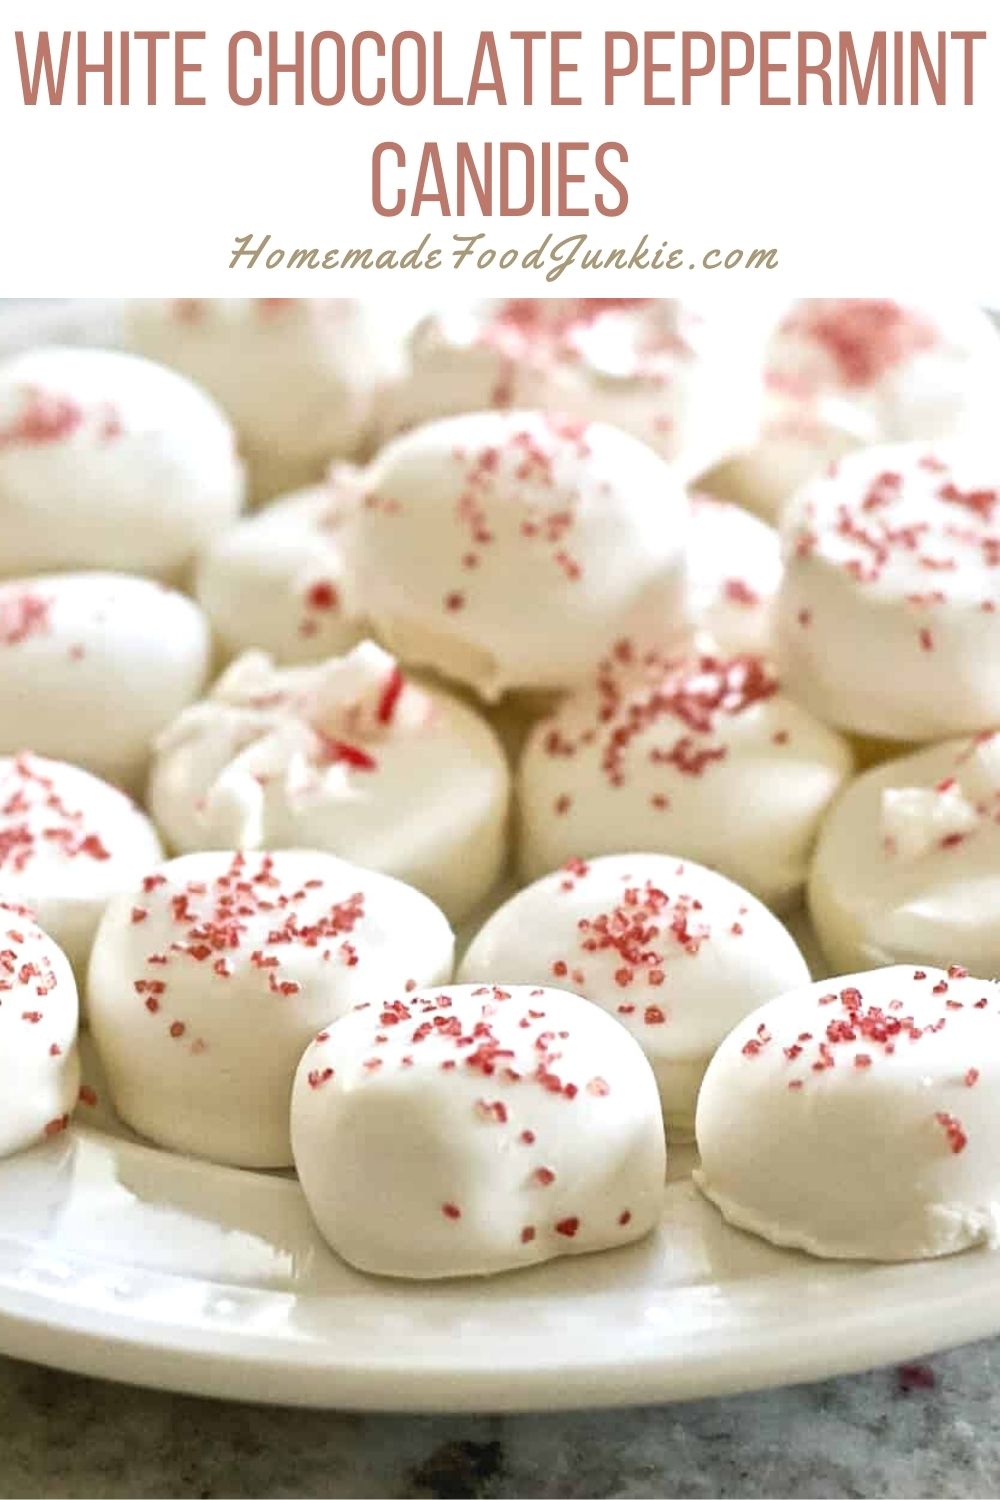 White Chocolate Peppermint Candies-Pin Image